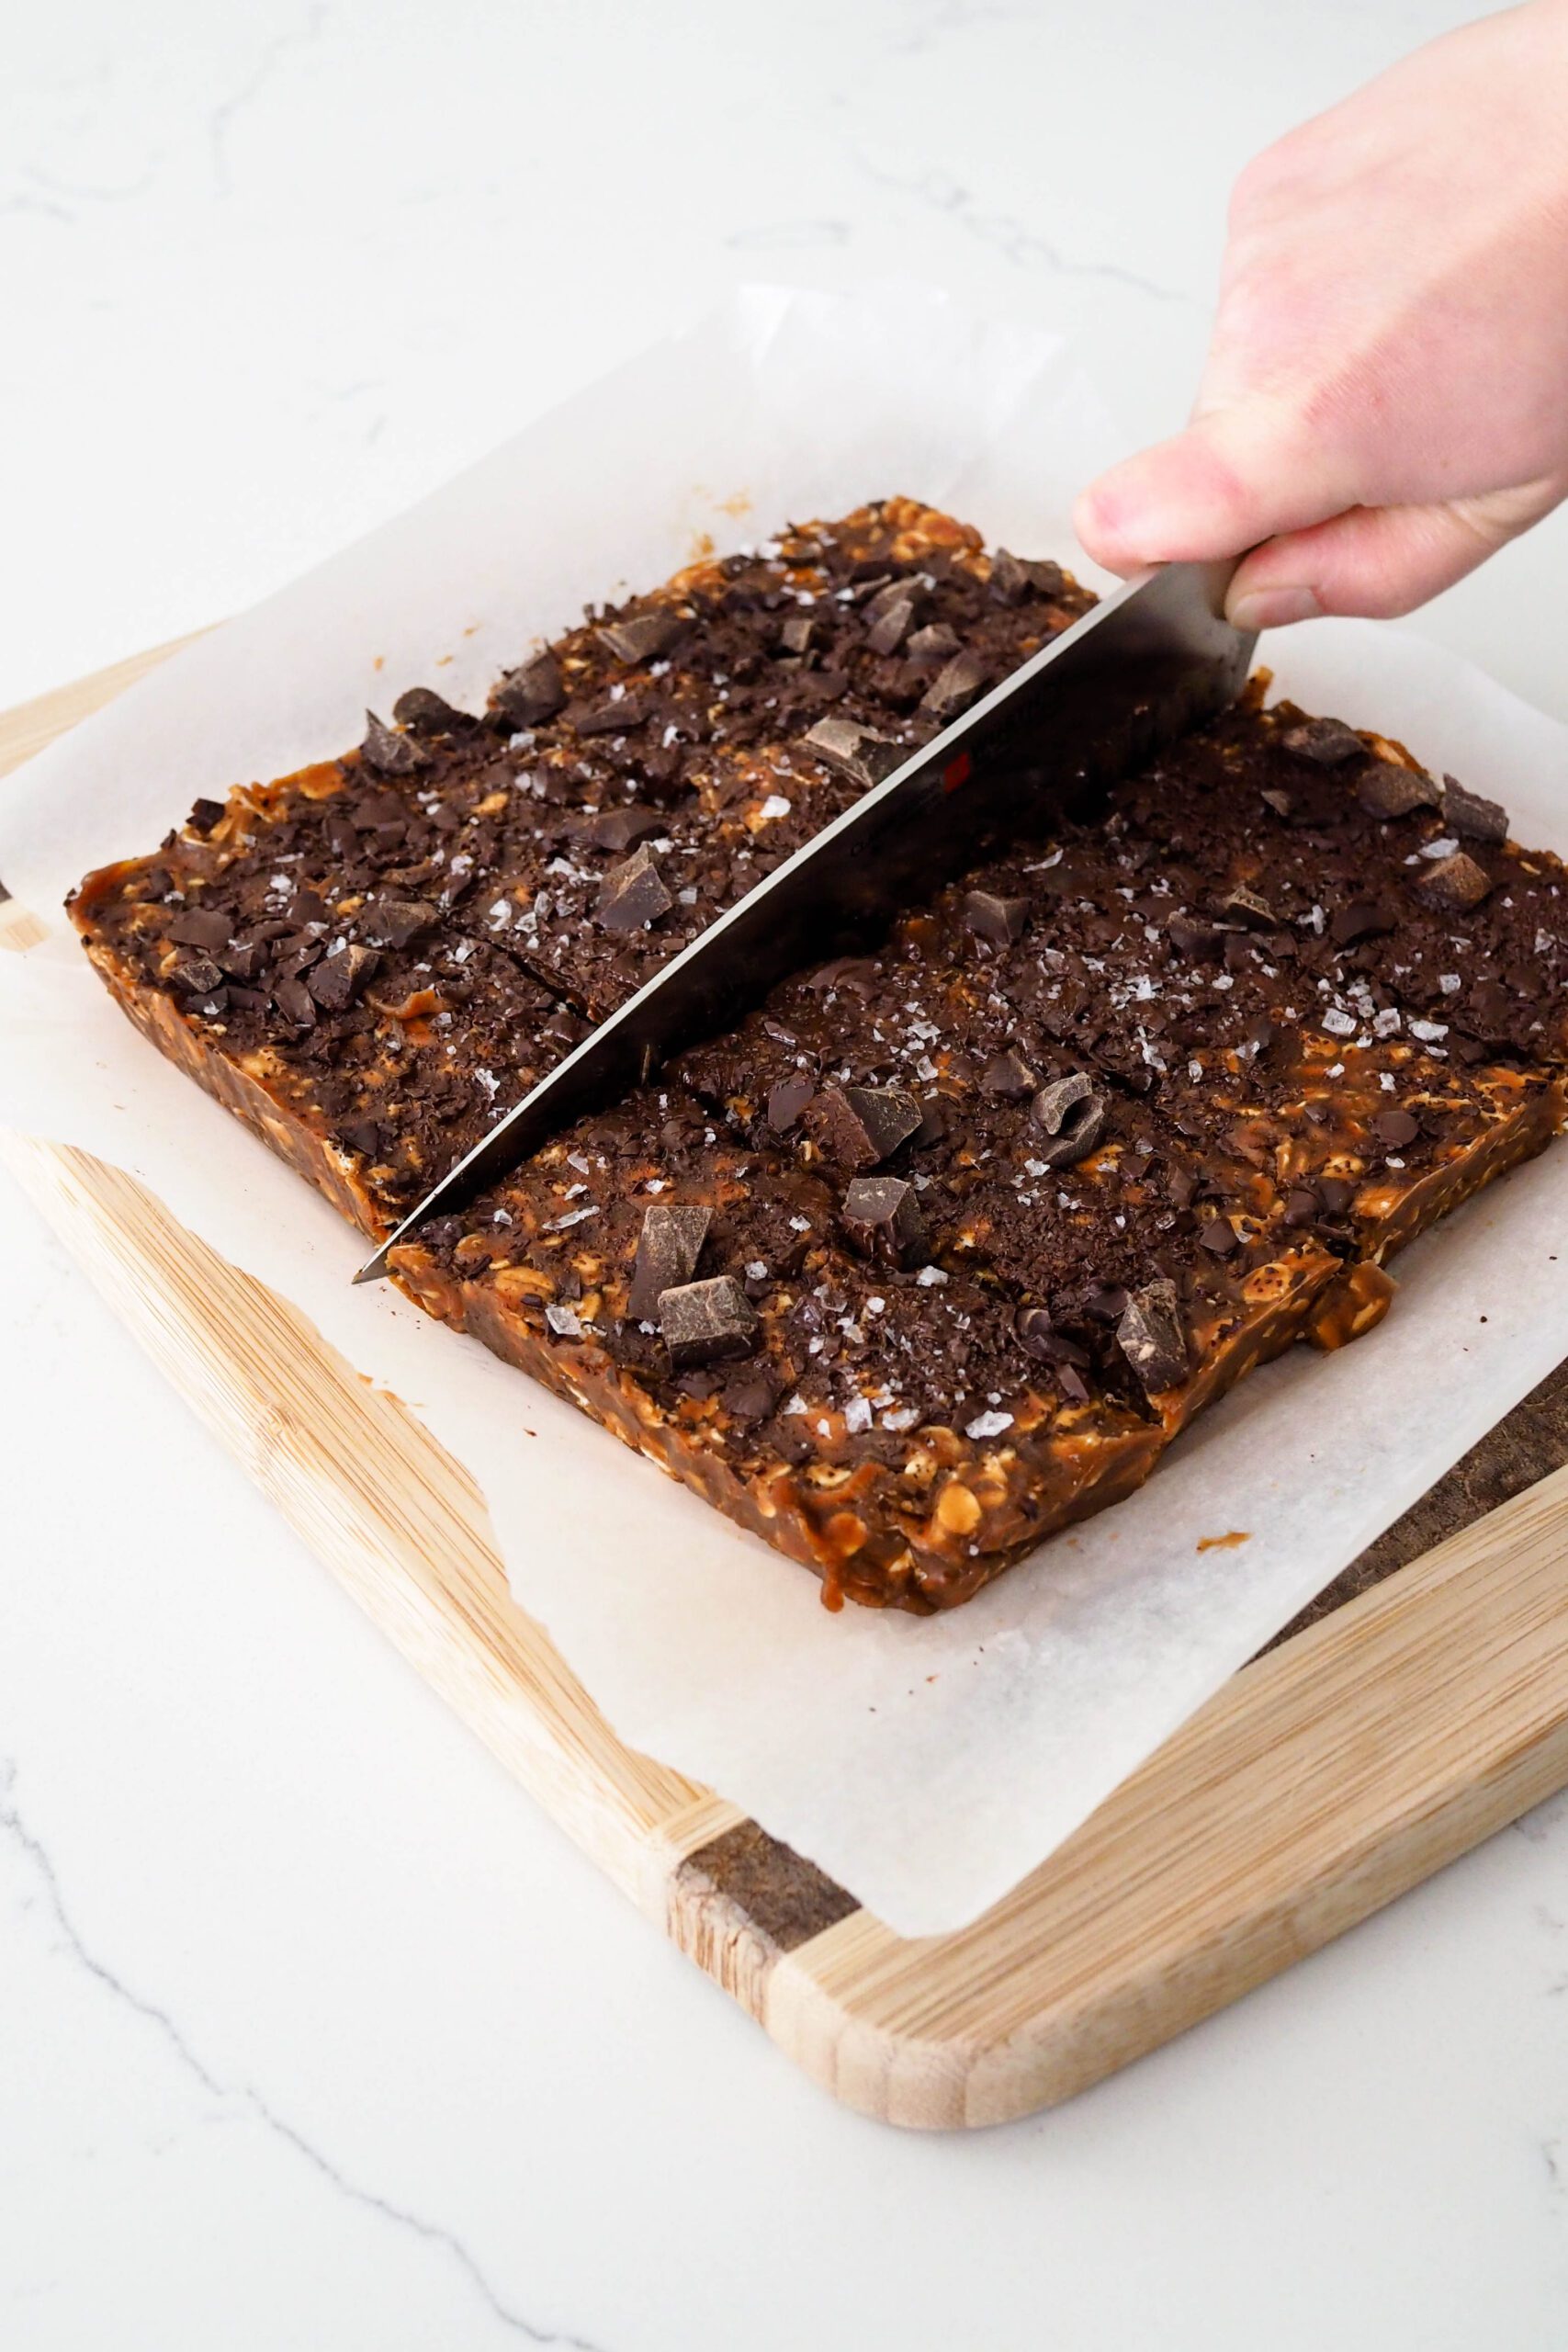 A knife cuts a bar of protein bars in half.